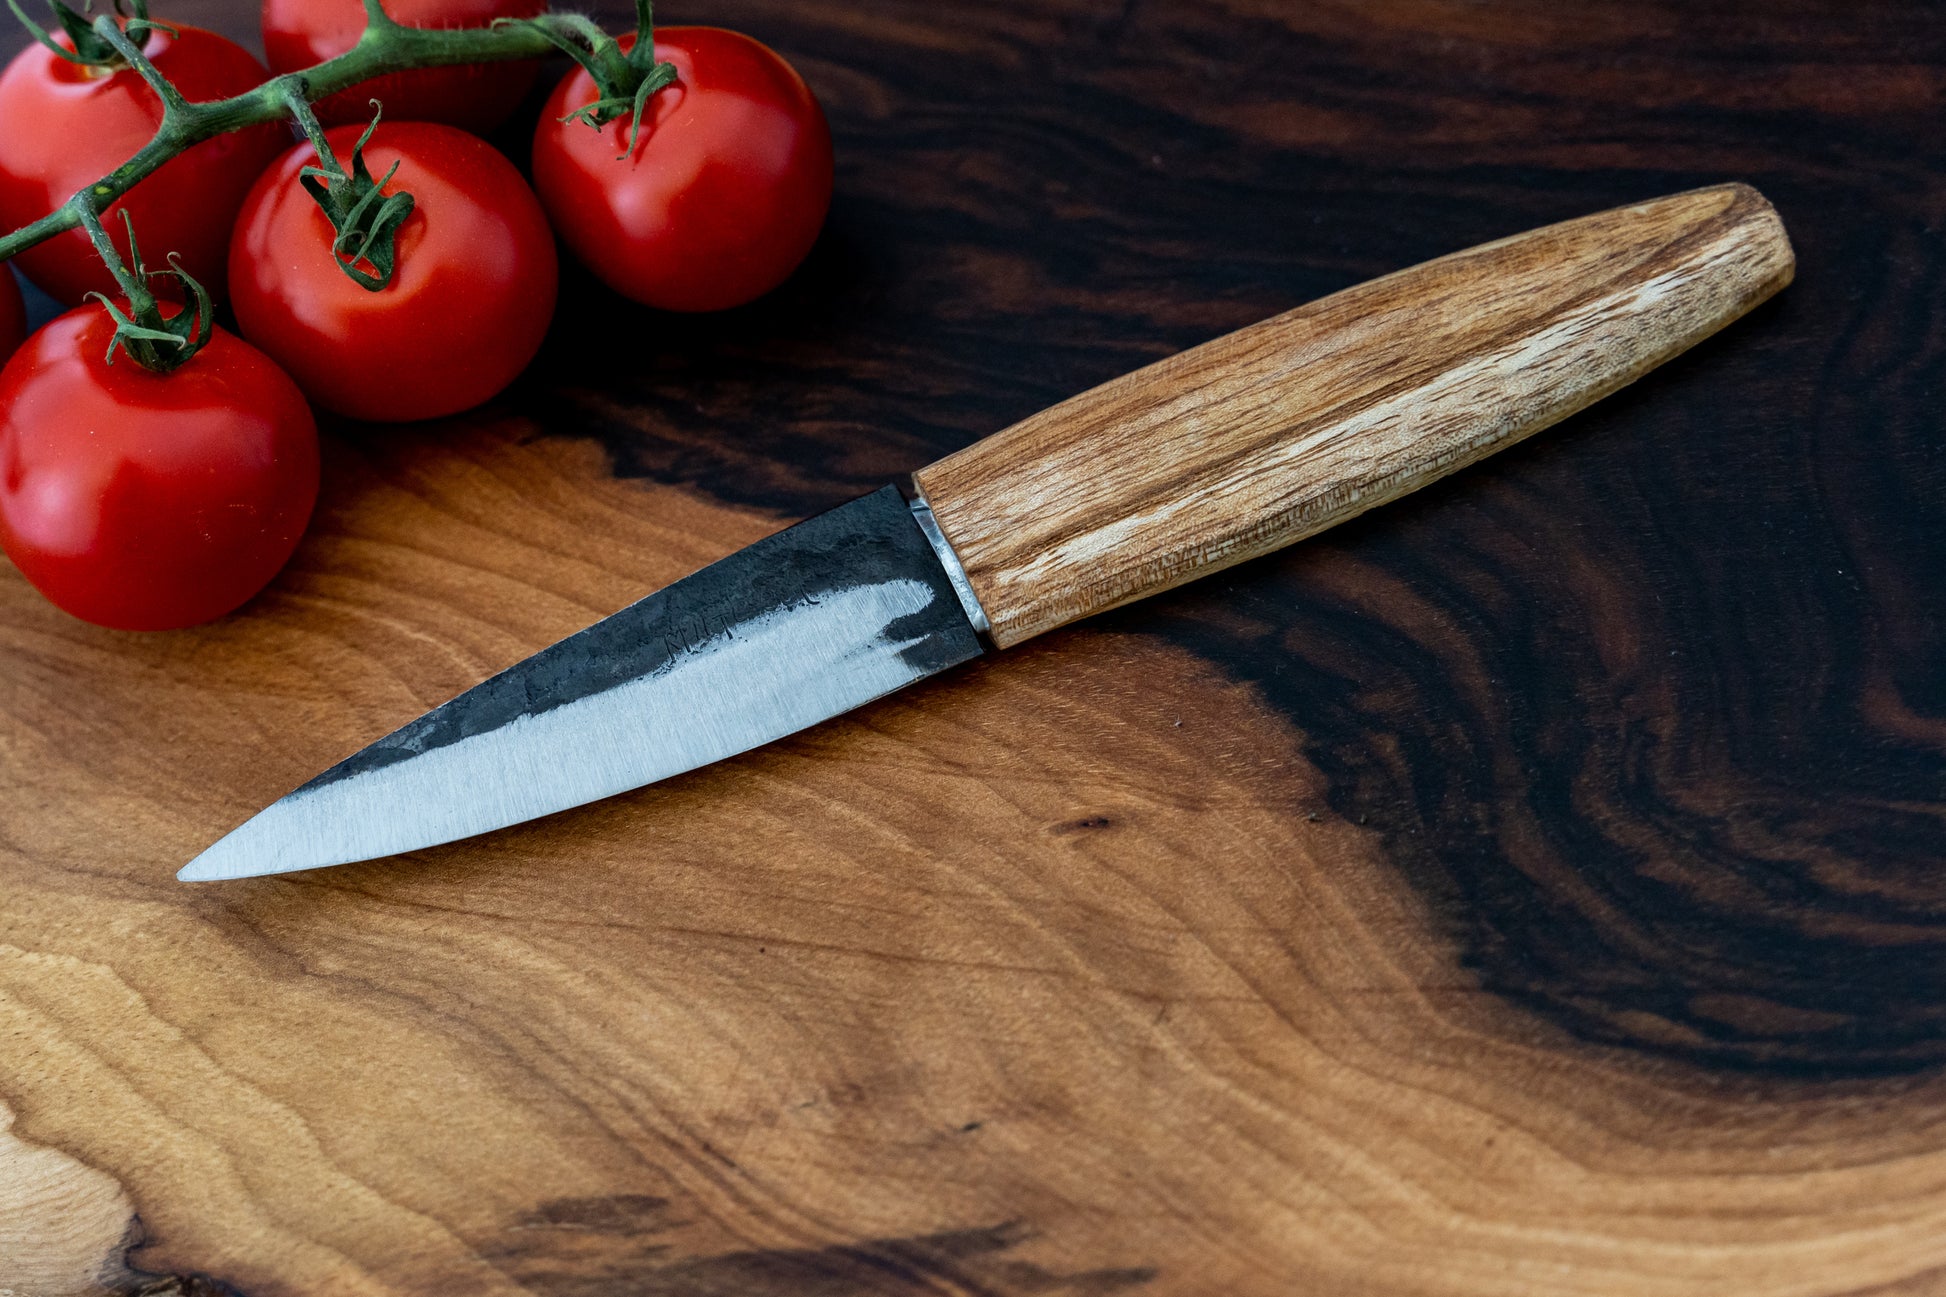 The Simple One Rustic Carbon Steel Paring Knife – Knife out